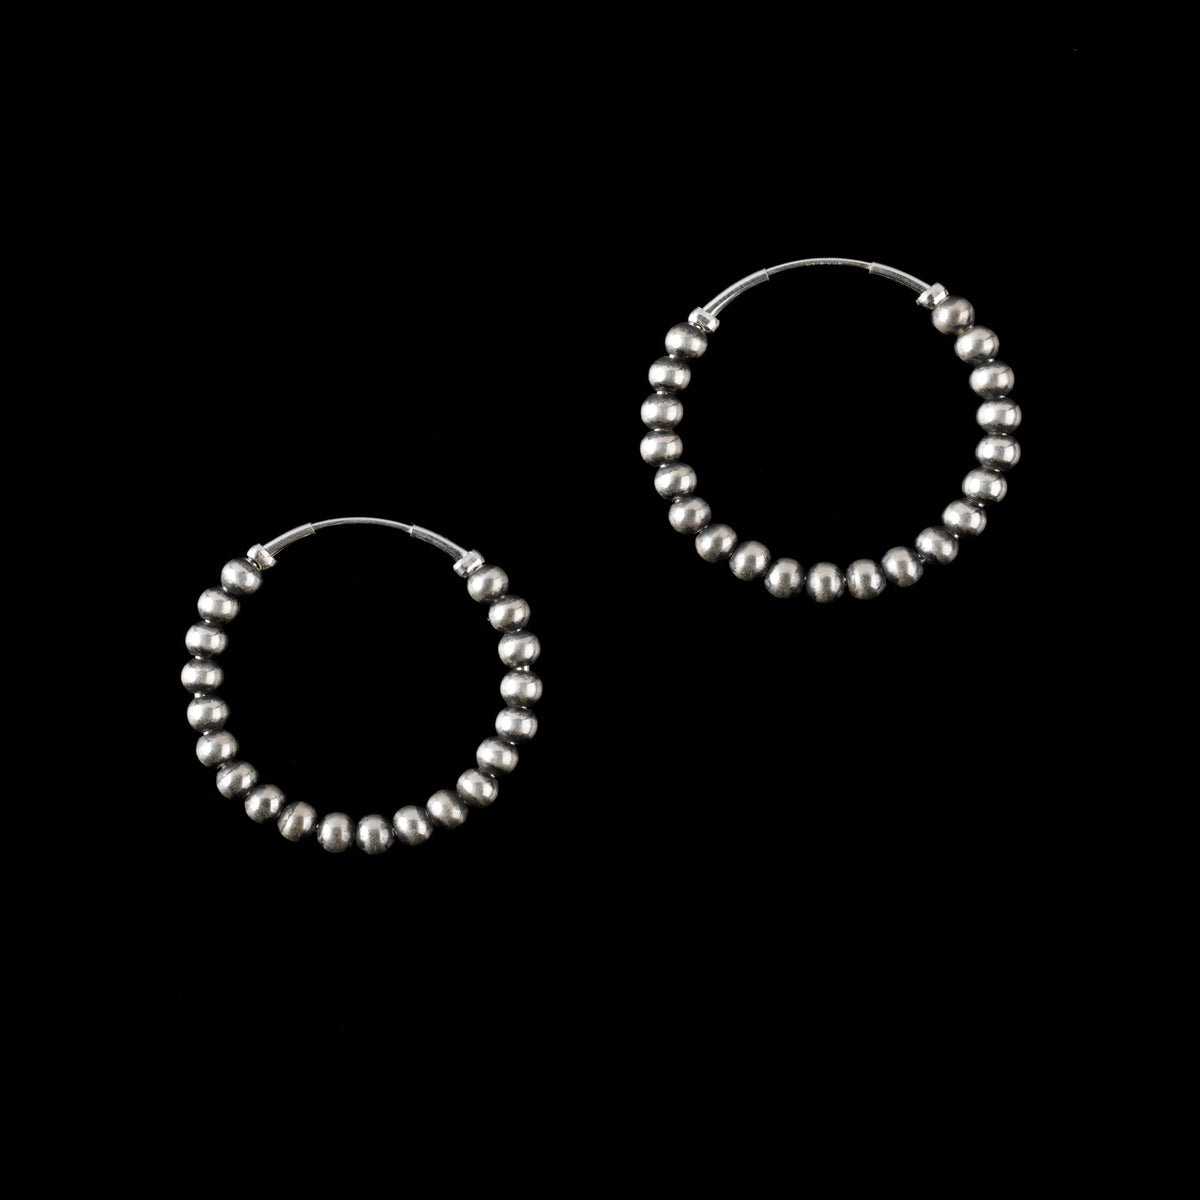 Sterling Silver Hoops with 4 mm Santa Fe Pearls - 1 1/4"